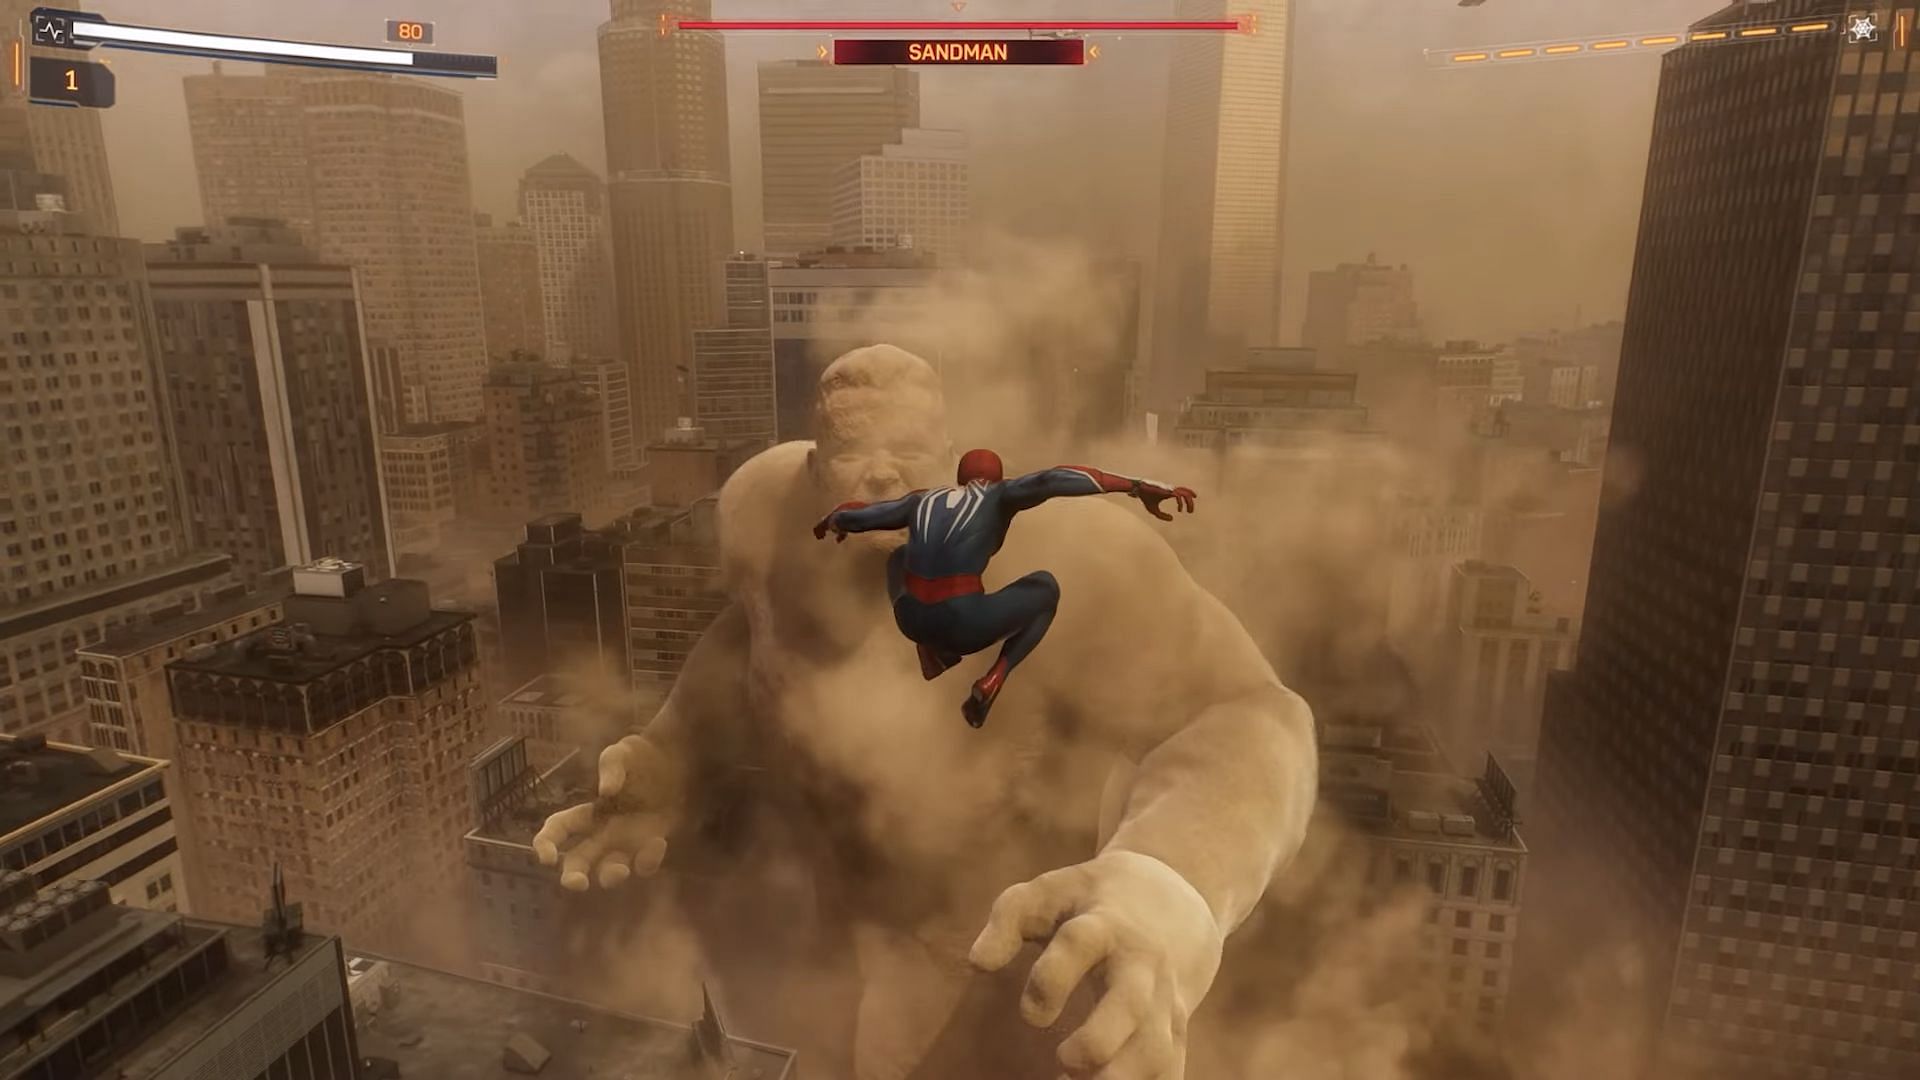 Sandman in Spider-Man 2 (Image via Sony Interactive Entertainment/ Game Guides Channel on YouTube)